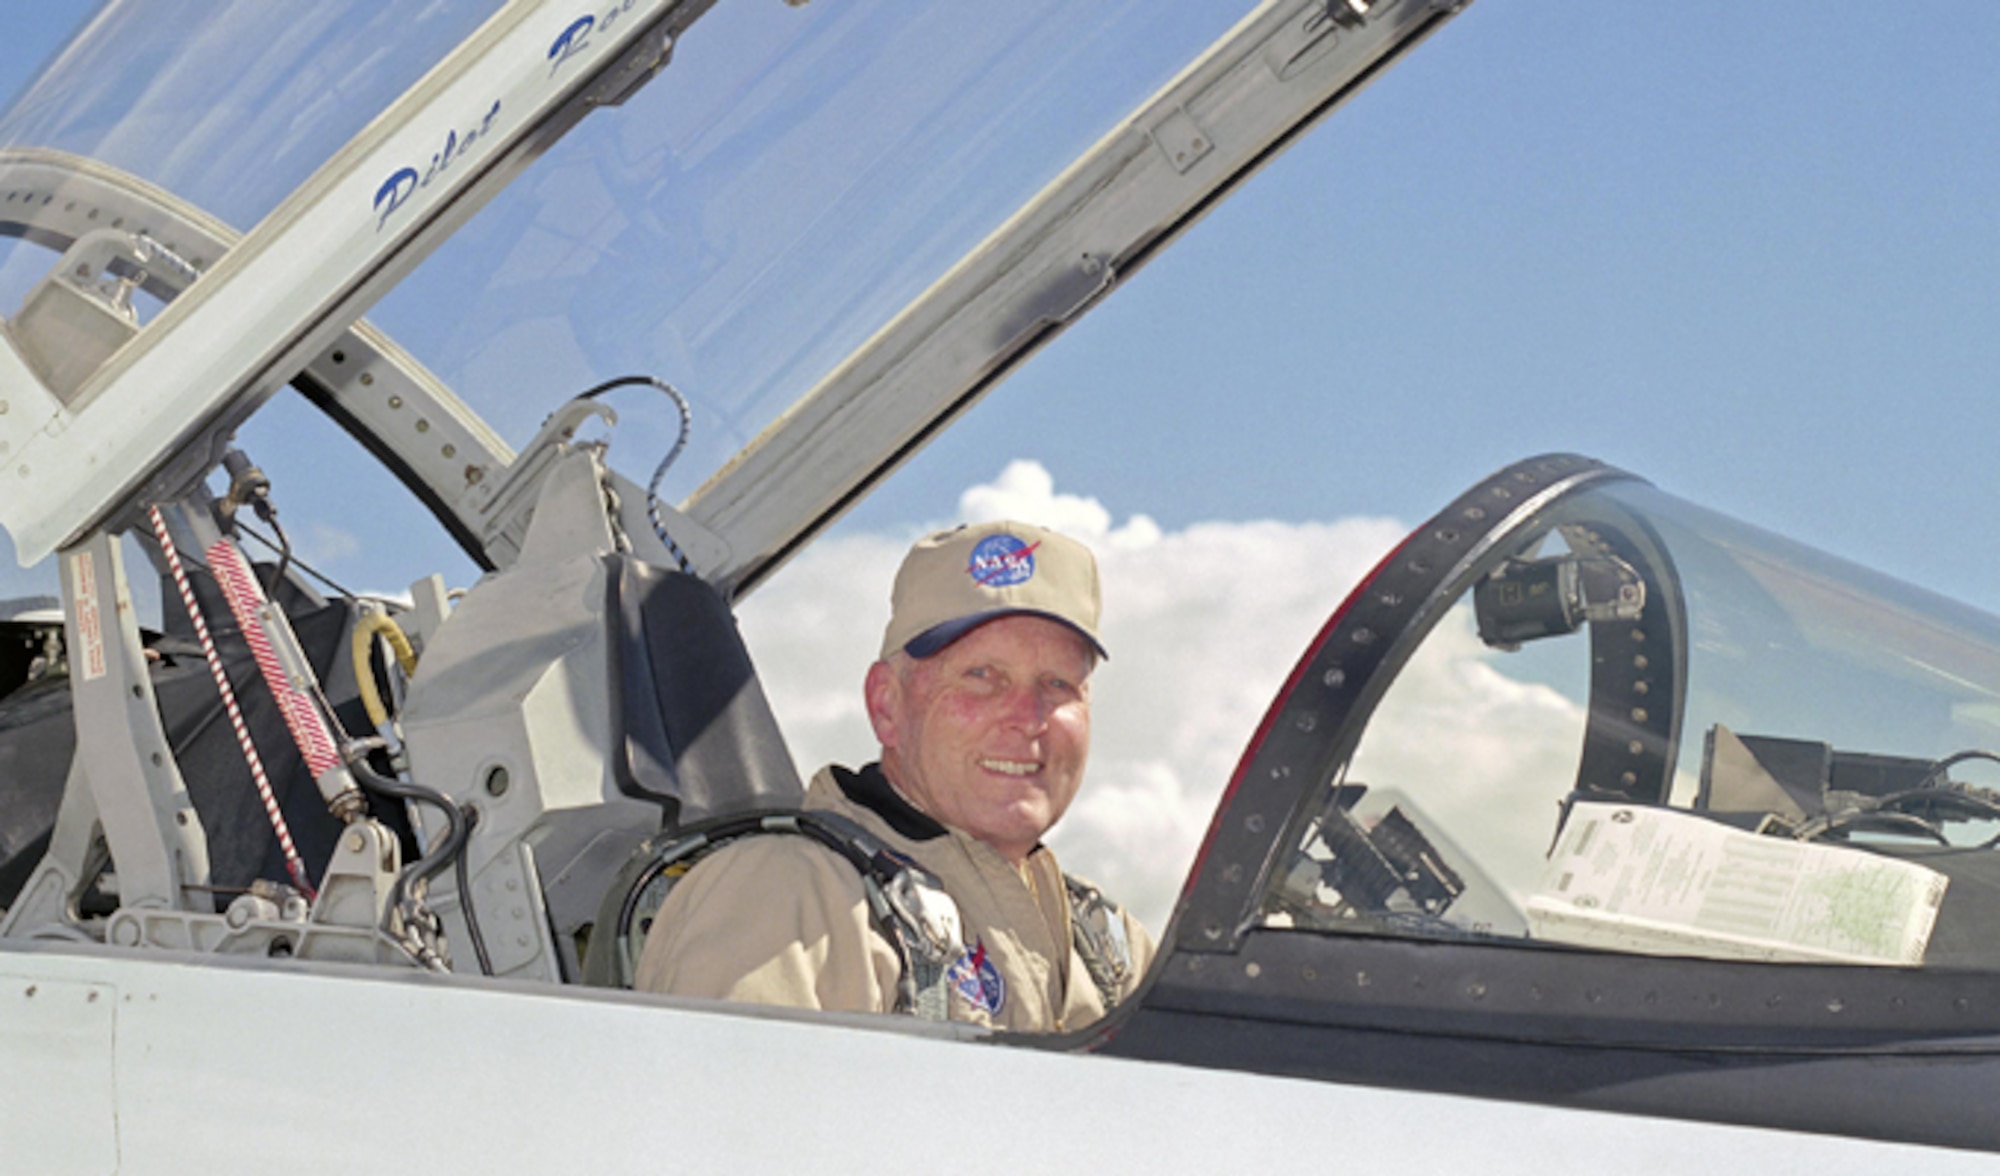 NASA astronaut and former Air Force test pilot, retired Col. Gordon Fullerton in the cockpit of a T-38 Talon mission support aircraft at NASA's Dryden Flight Research Center at Edwards Air Force Base, Calif. Fullerton passed away Aug. 21, 2013. (NASA photo/Tony Landis)